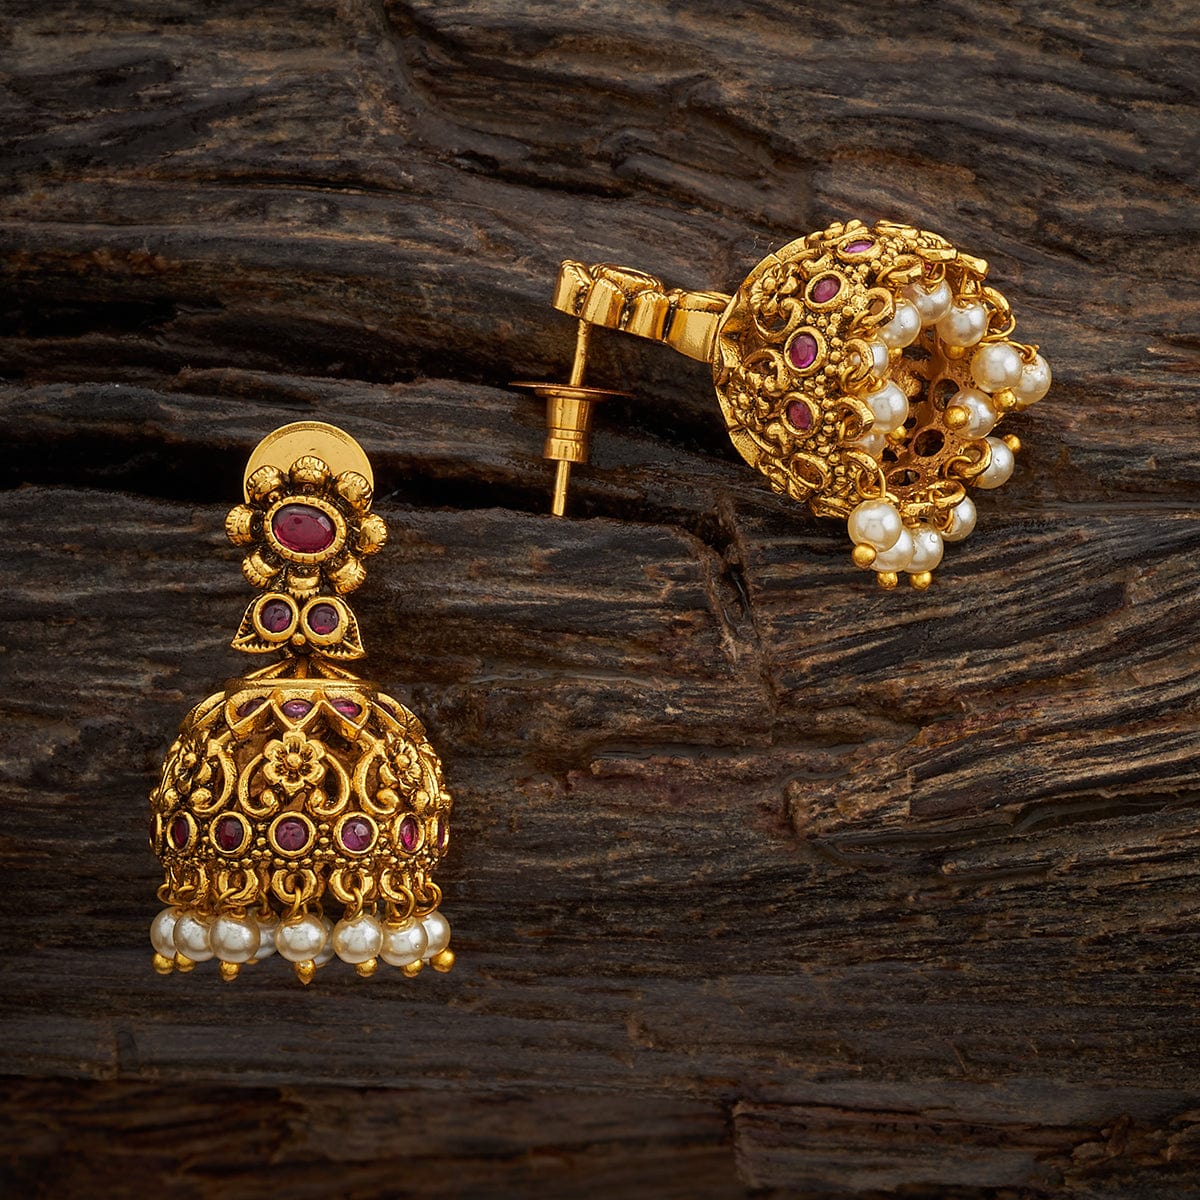 The Gilded Antique Earrings! Traditional Designs starting at ₹280 – Kushal's  Fashion Jewellery | Antique earrings, Fashion jewelry, Earrings